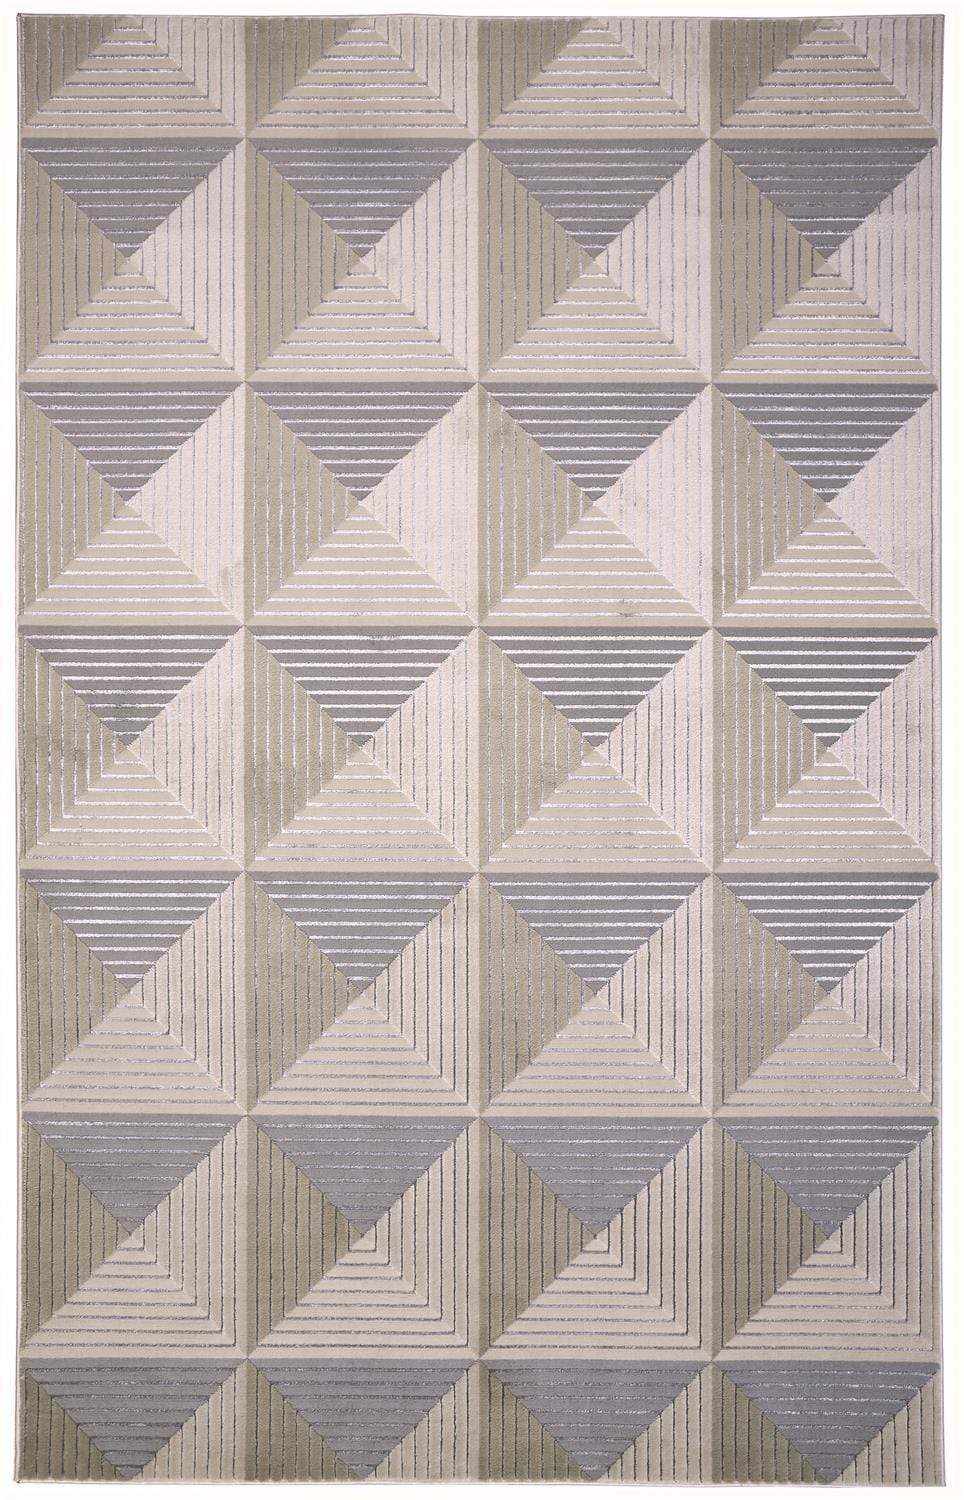 Feizy Feizy Micah Architectural Inspired Rug - Available in 6 Sizes - Silver & Bone 5' x 8' 6943044FBGEGRYE10